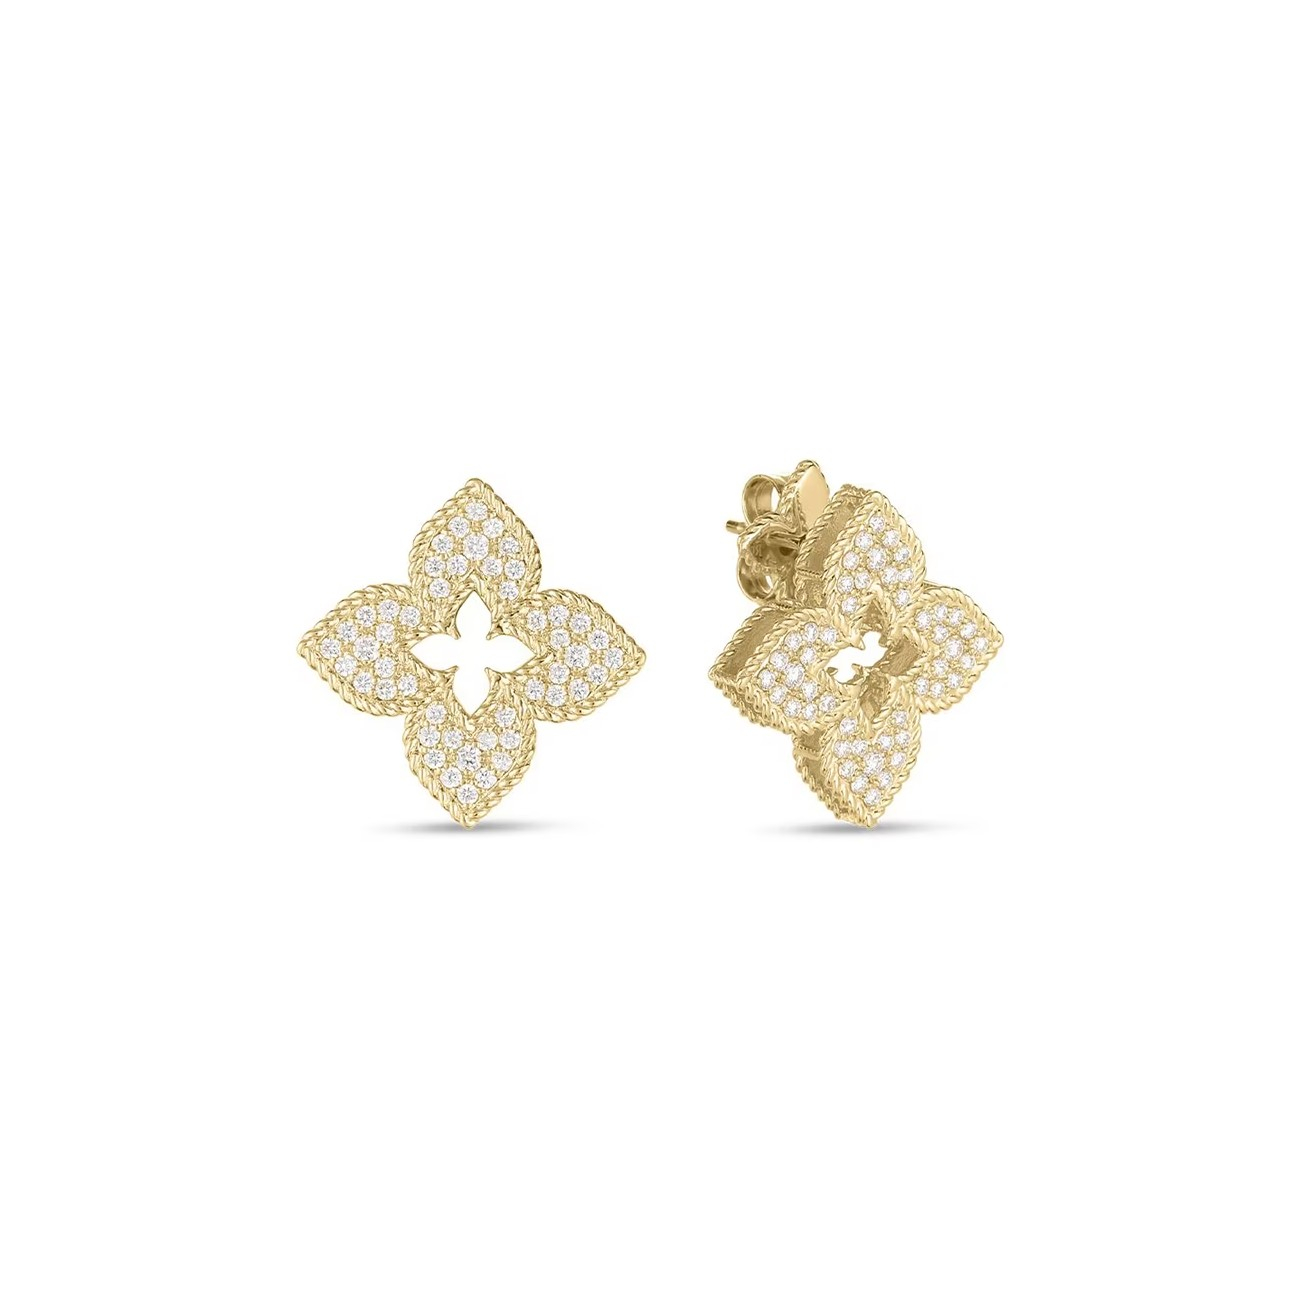 Louis Vuitton® B Blossom Earrings Yellow Gold, White Gold And Pave Diamond